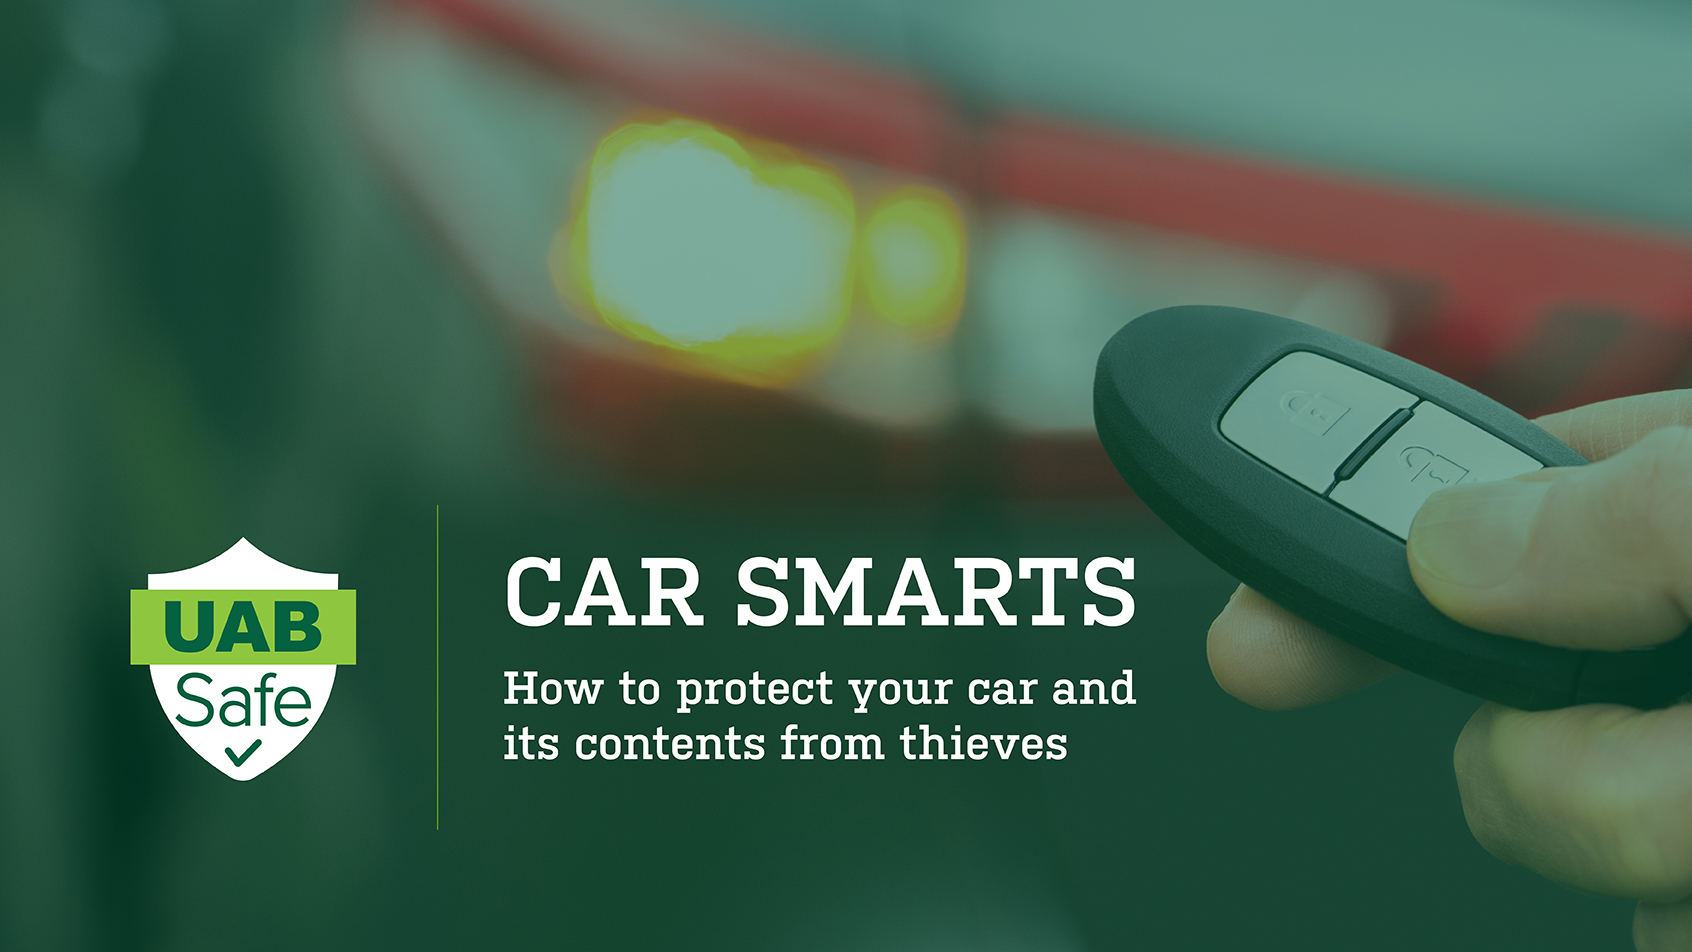 UAB Safe: Car Smarts. How to protect your car and its contents from thieves.